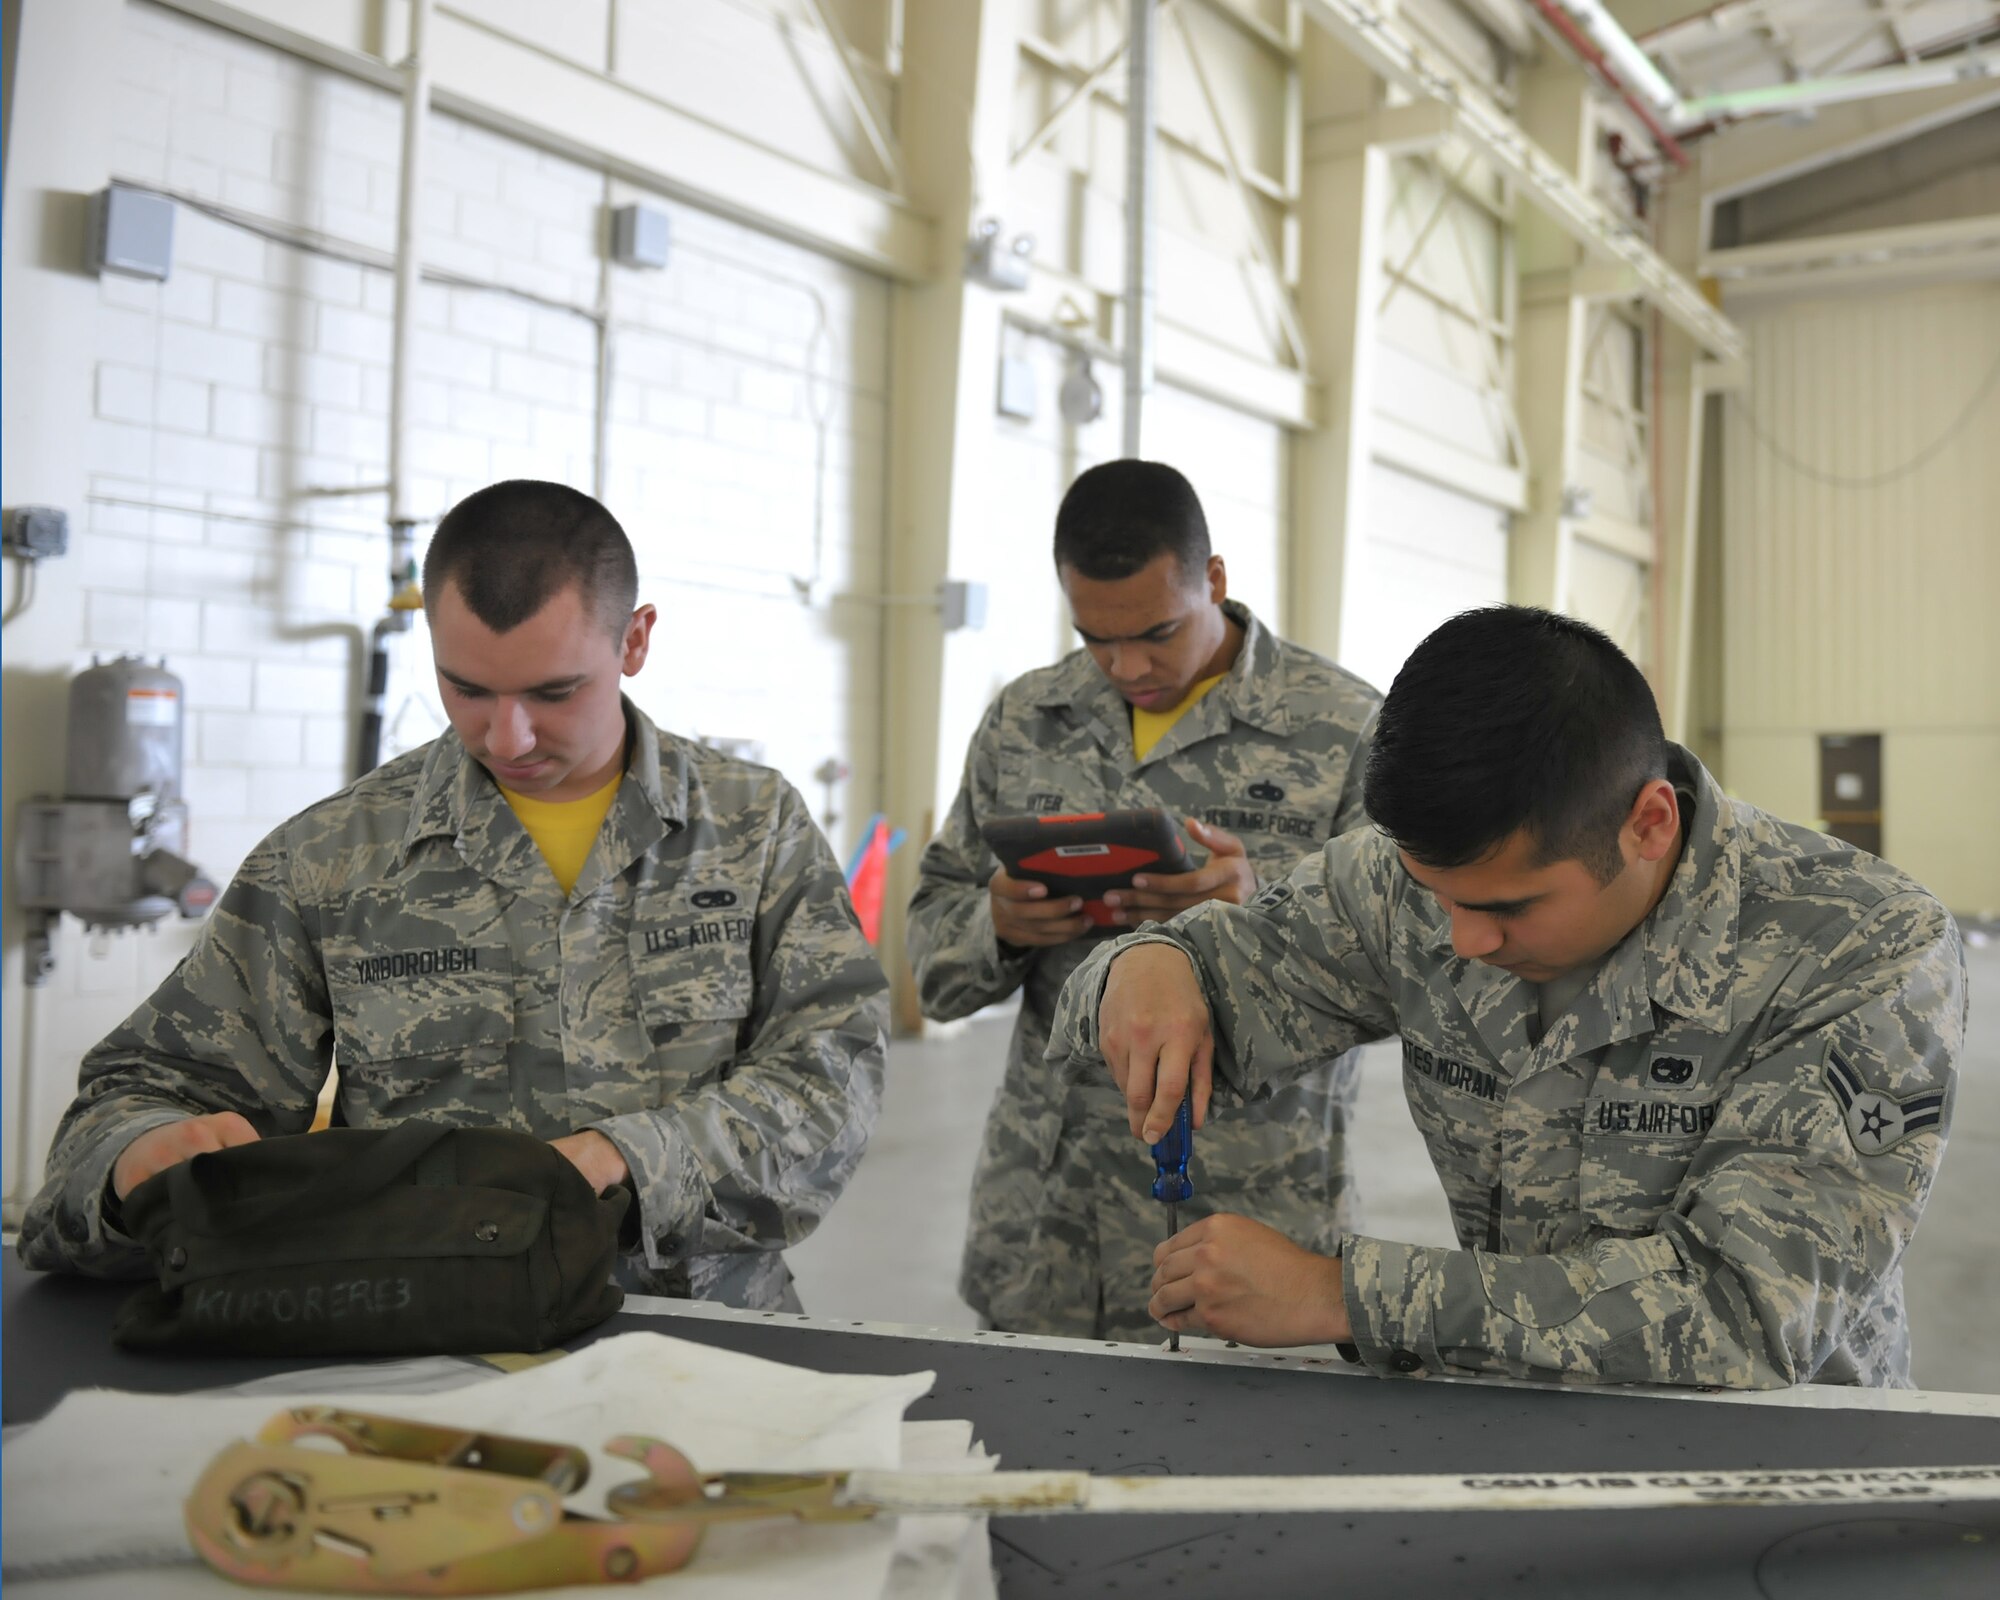 Airman 1st Class Ismael Fuentes Moran, 8th Aircraft Maintenance Squadron Aircraft Armament Systems craftsman, installs a support bracket for a wing wiring harness as crew member Airman 1st Class Carson Yarborough and team chief Staff Sgt. Dwight  on June 24, 2016 at Kunsan Air Base, Republic of Korea. The team are working with other maintenance Air Force Specialty Codes on a simultaneous double wing replacement. (U.S. Air Force photo/Master Sgt. David Miller)